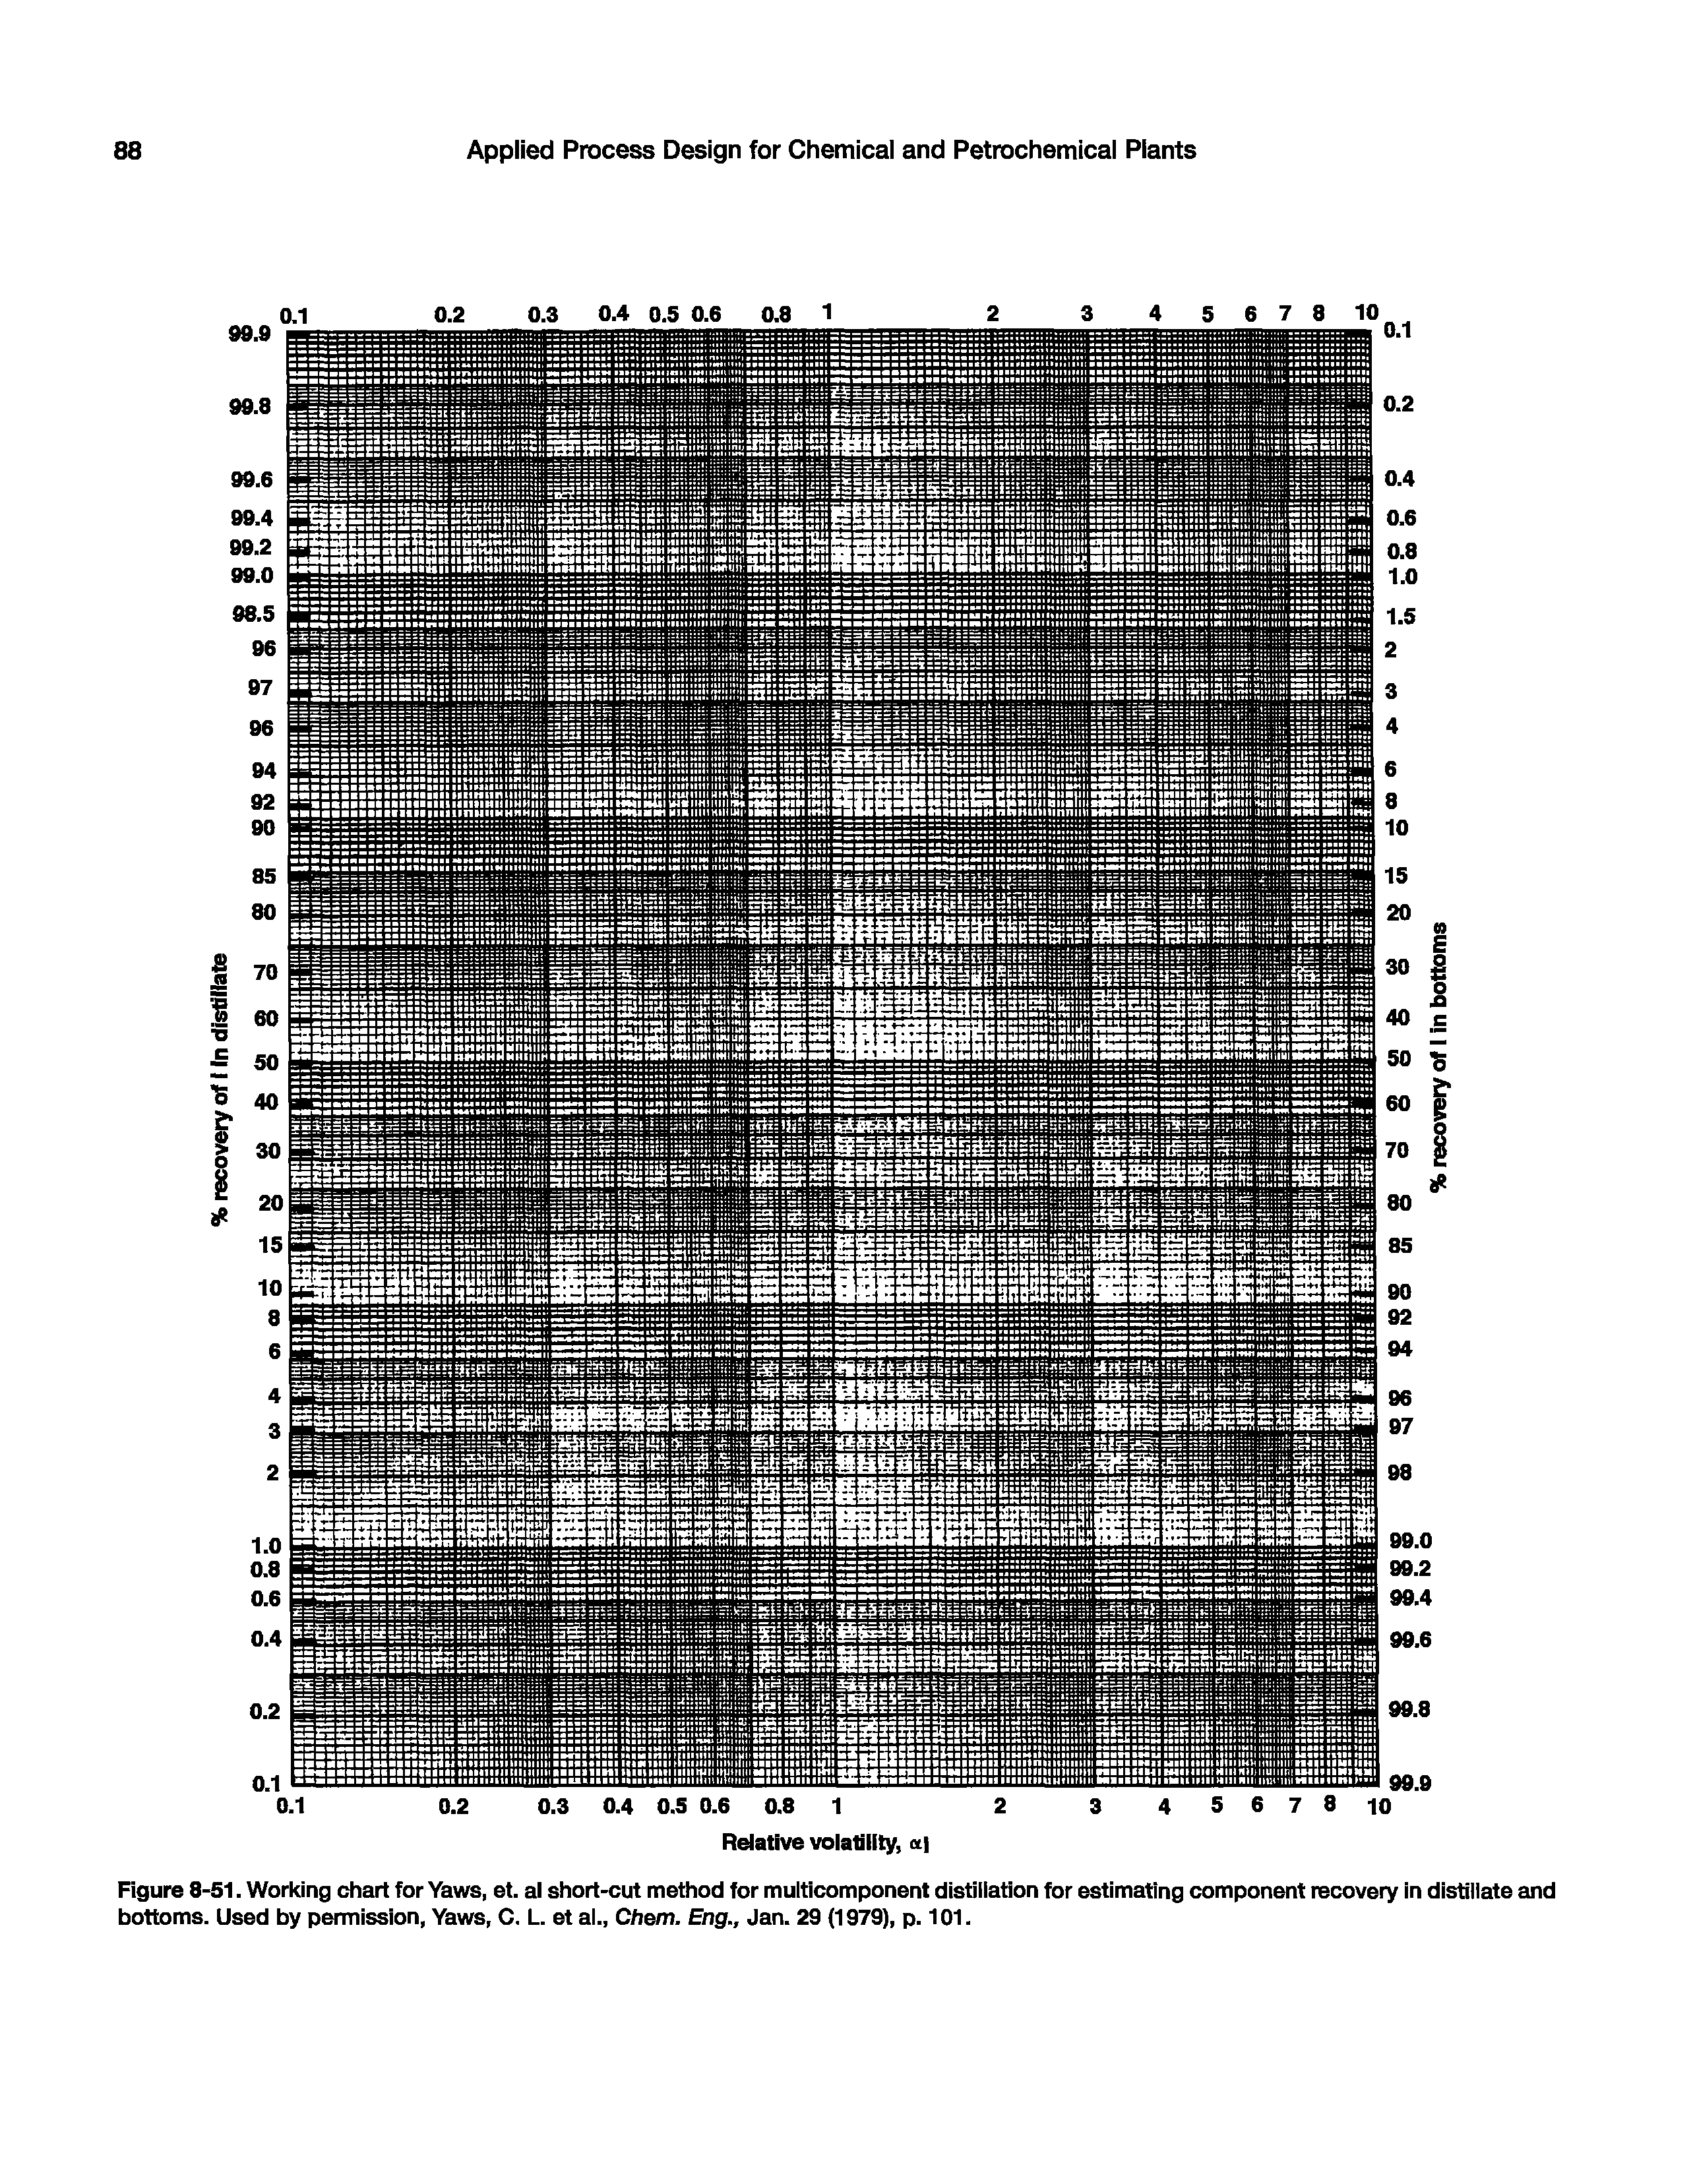 Figure 8-51. Working chart for Yaws, et. al short-cut method for multicomponent distillation for estimating component recovery in distillate and bottoms. Used by permission, Yaws, C. L. et al., C/iem. Eng., Jan. 29 (1979), p. 101.